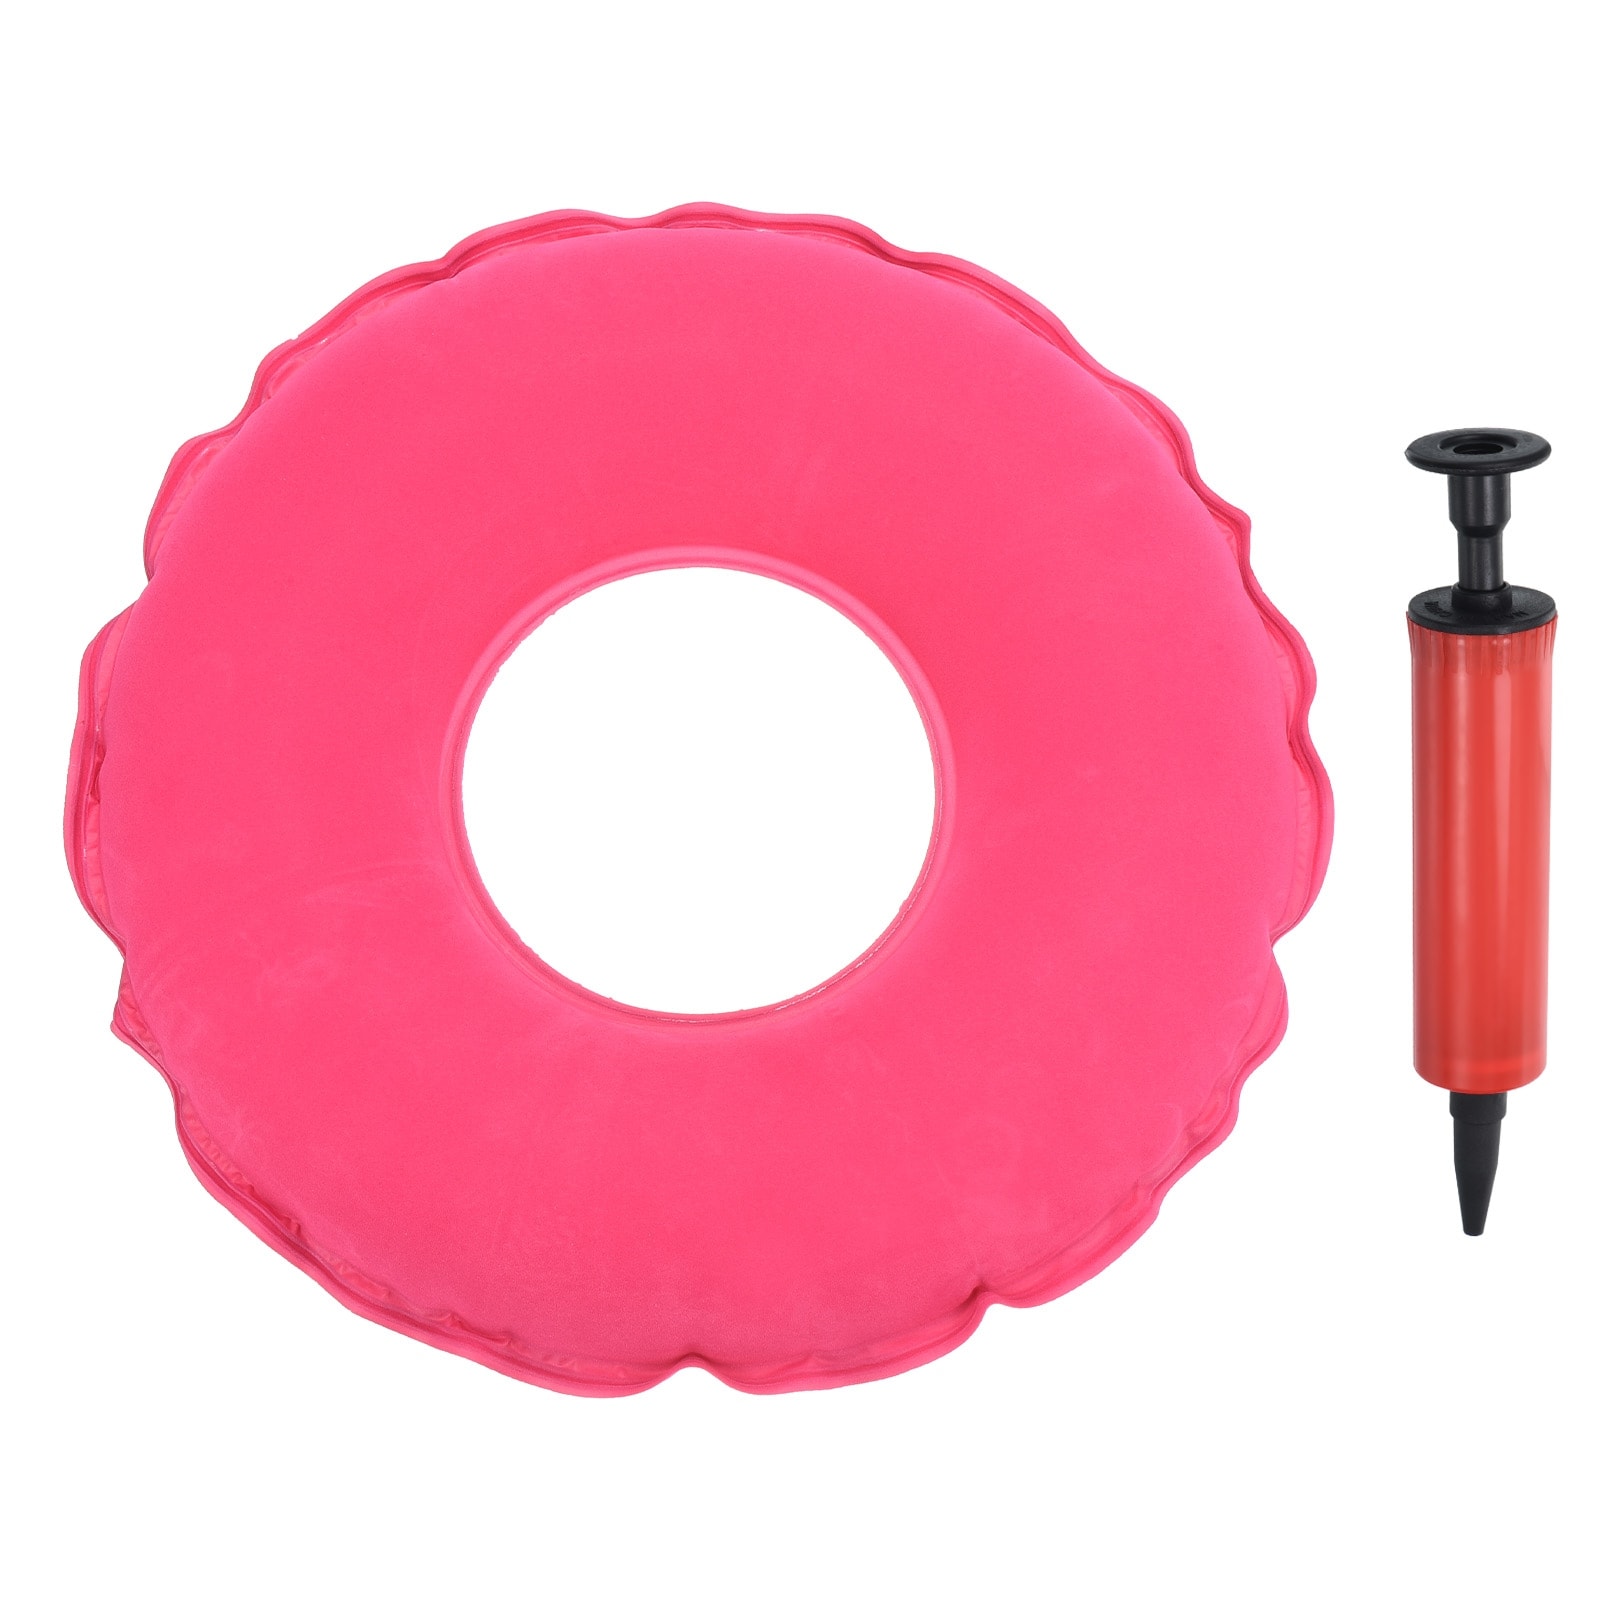 https://ak1.ostkcdn.com/images/products/is/images/direct/6894d9aef989c112ac9a58309bfef661dea817f7/Inflatable-Seat-Cushion%2C-Donut-Cushion-Seat-Donut-Pillow-with-Pump.jpg